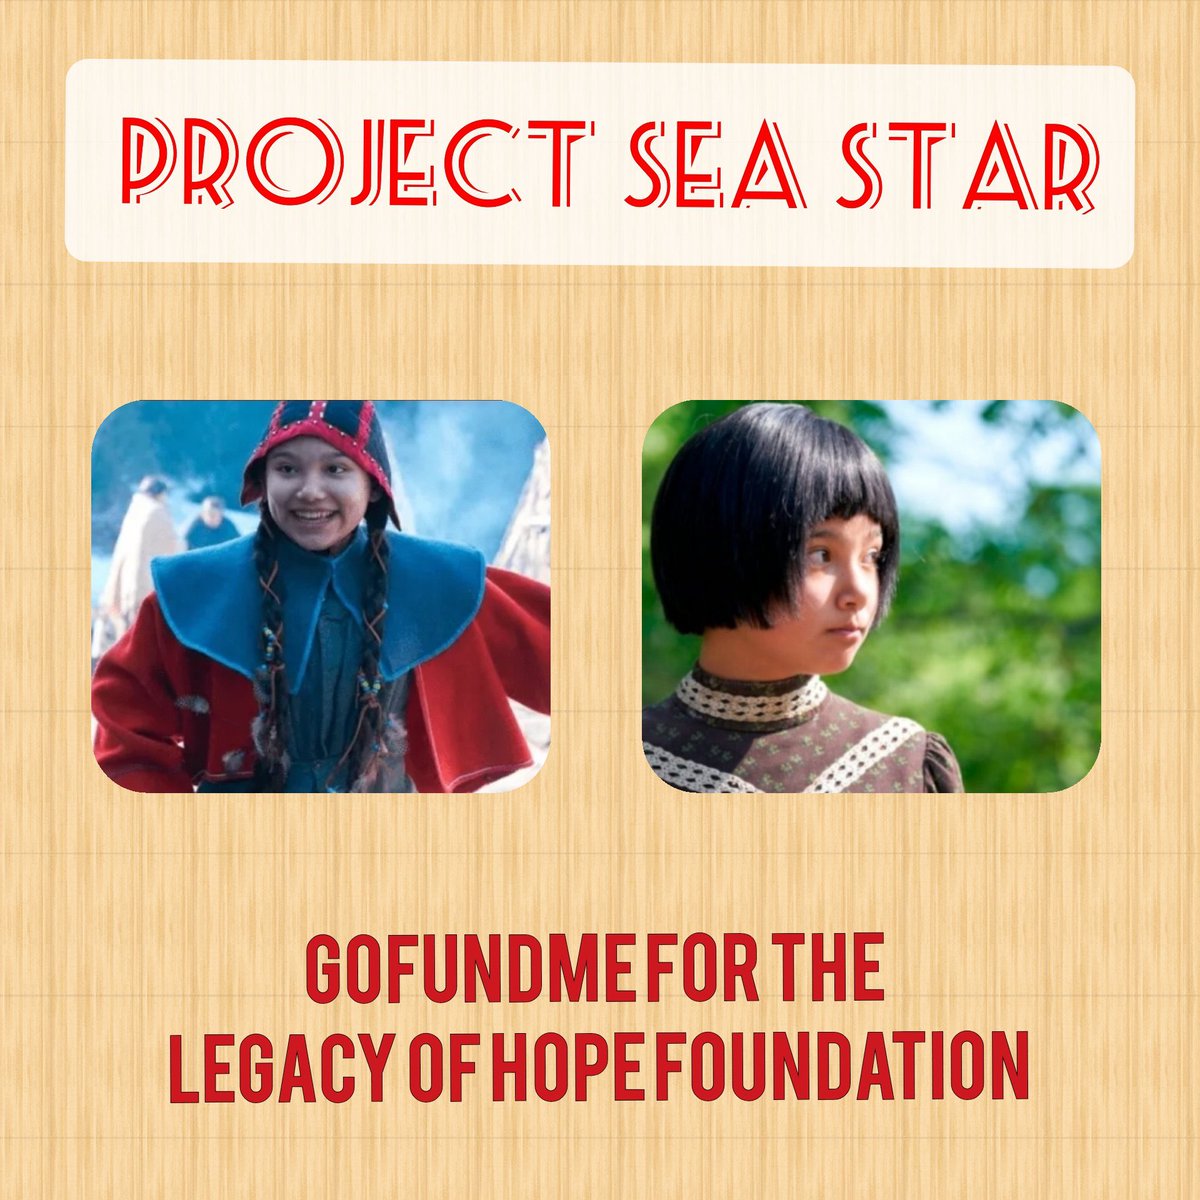 A lot of people learned about the Residential School System after the storyline aired in s3, and Anne taught us to take action to help others. Thus, tonight we are launching this project to donate money to the Legacy of Hope Foundation.